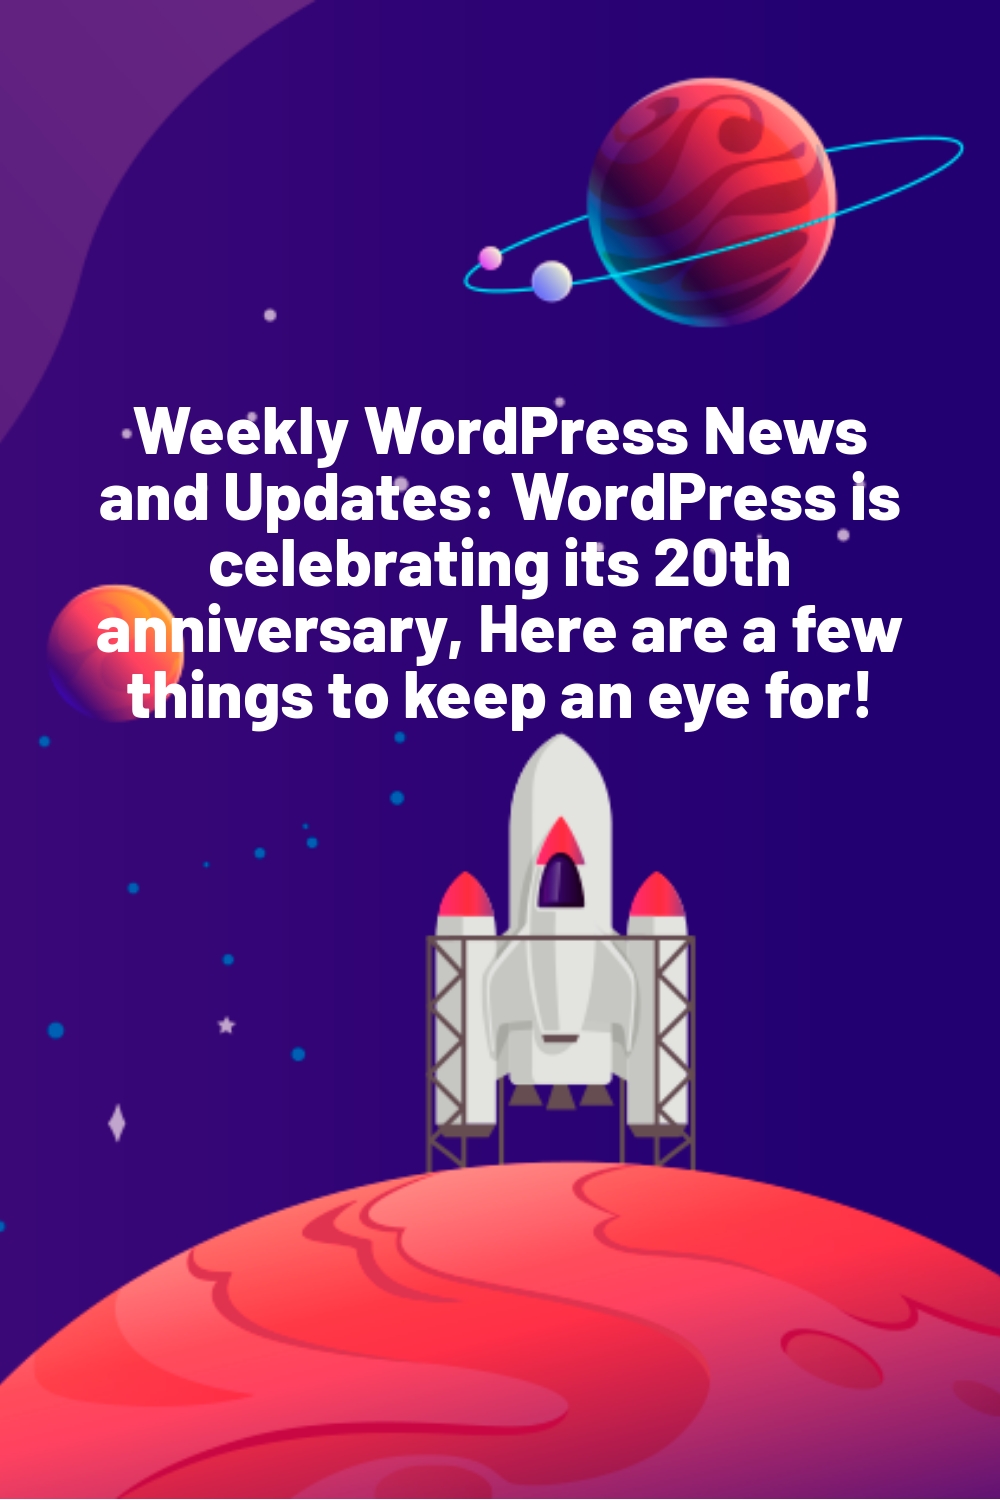 Weekly WordPress News and Updates: WordPress is celebrating its 20th anniversary, Here are a few things to keep an eye for!